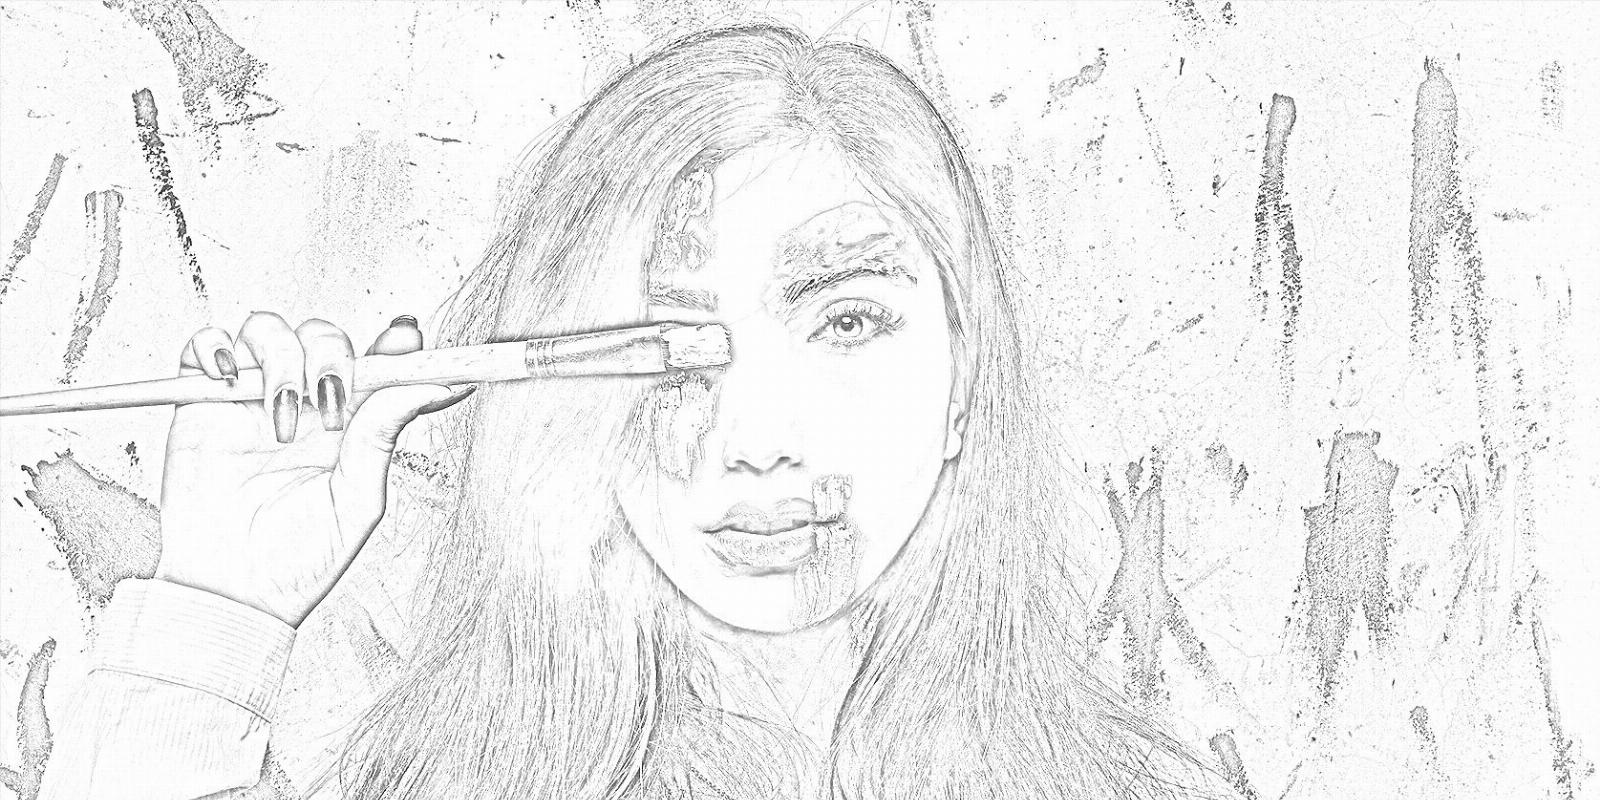 How to Turn Your Photos Into Pencil Drawings Using Photoshop